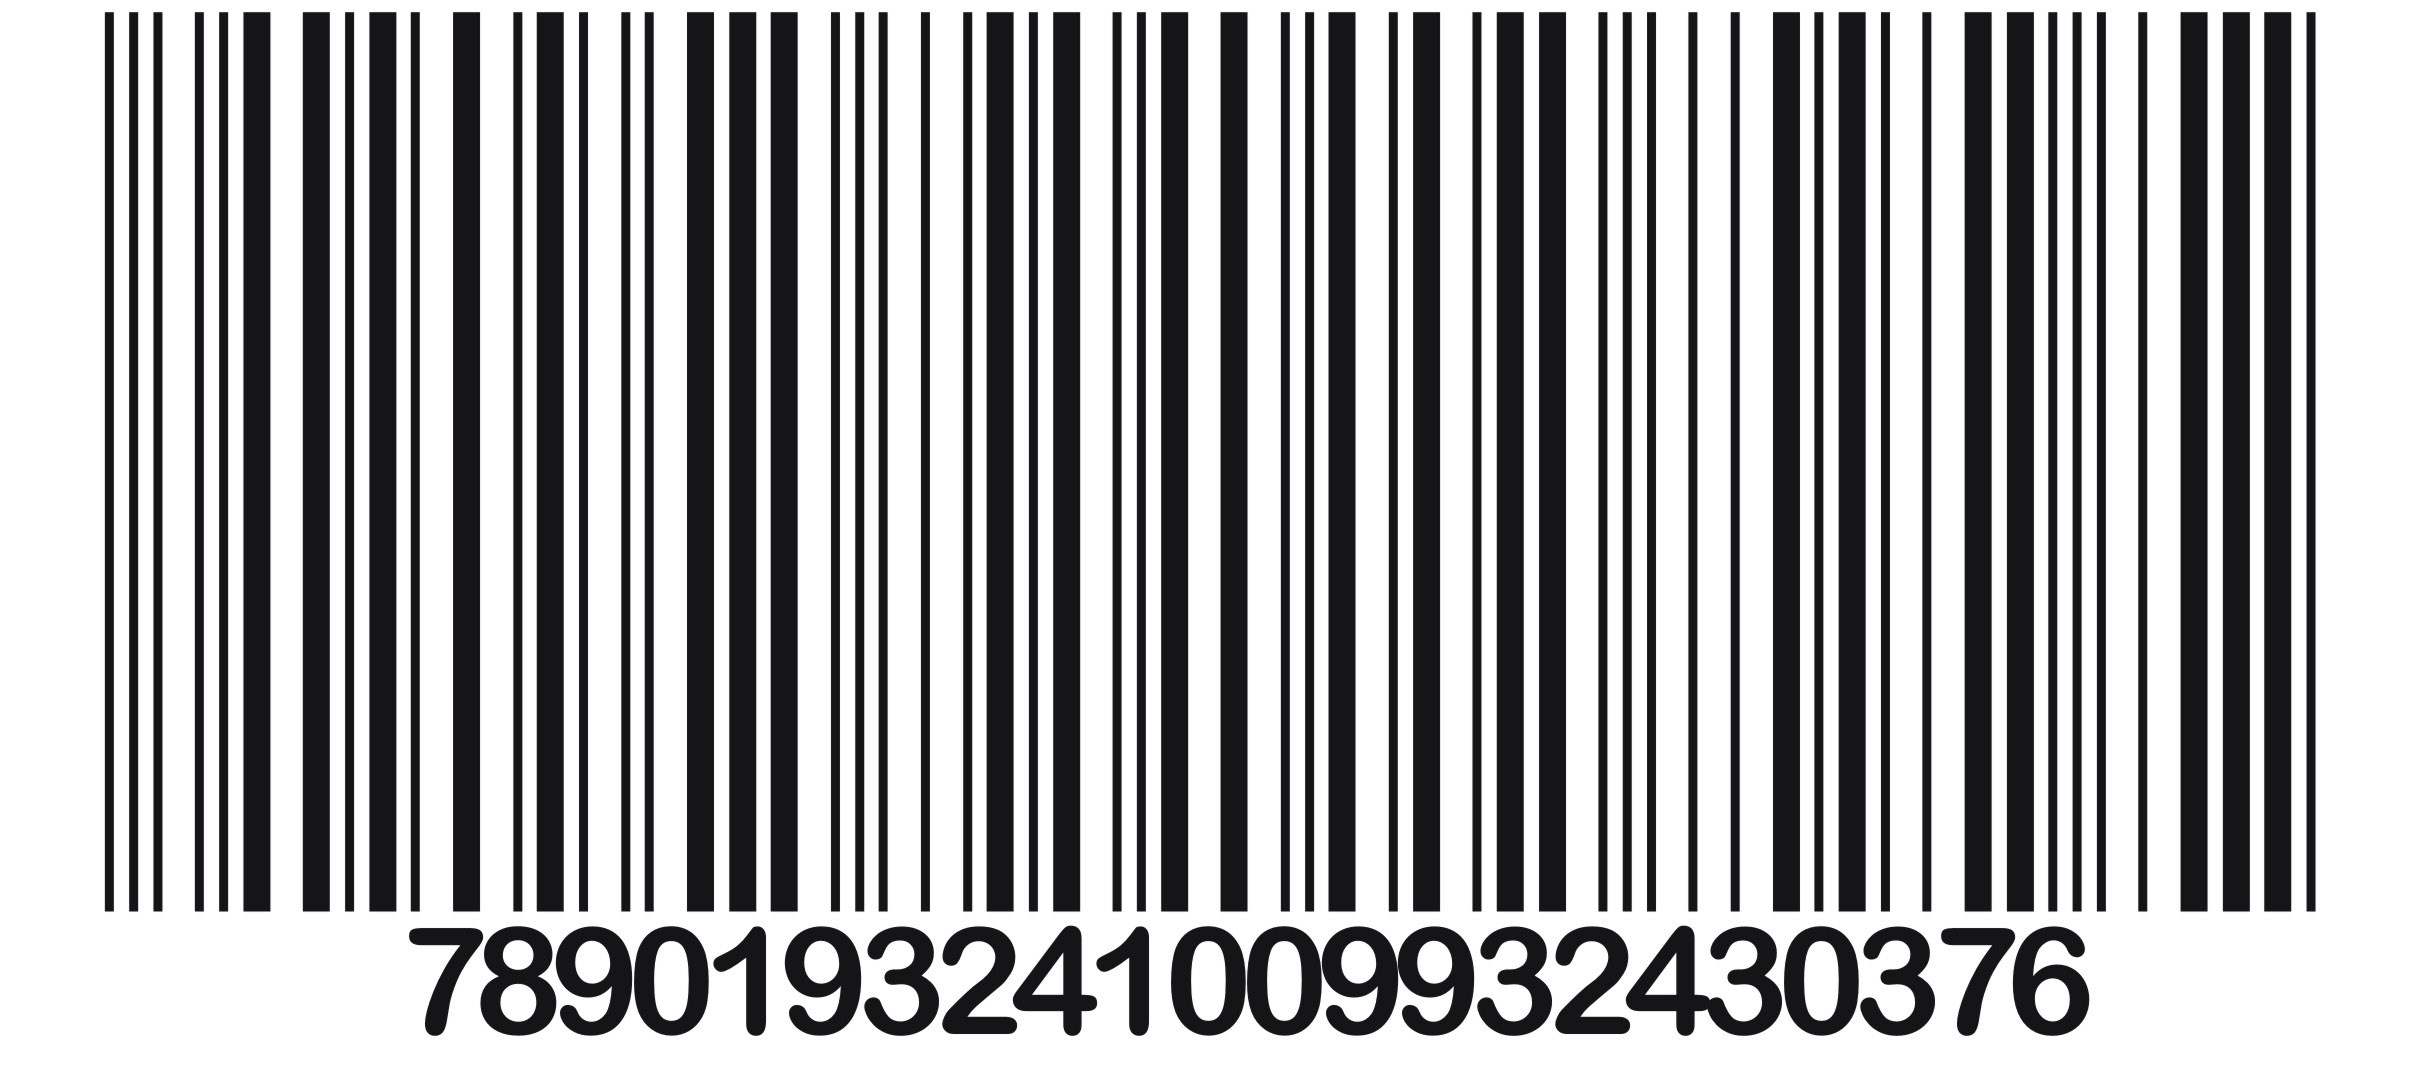 Possibly a barcode for a Black Friday TV?